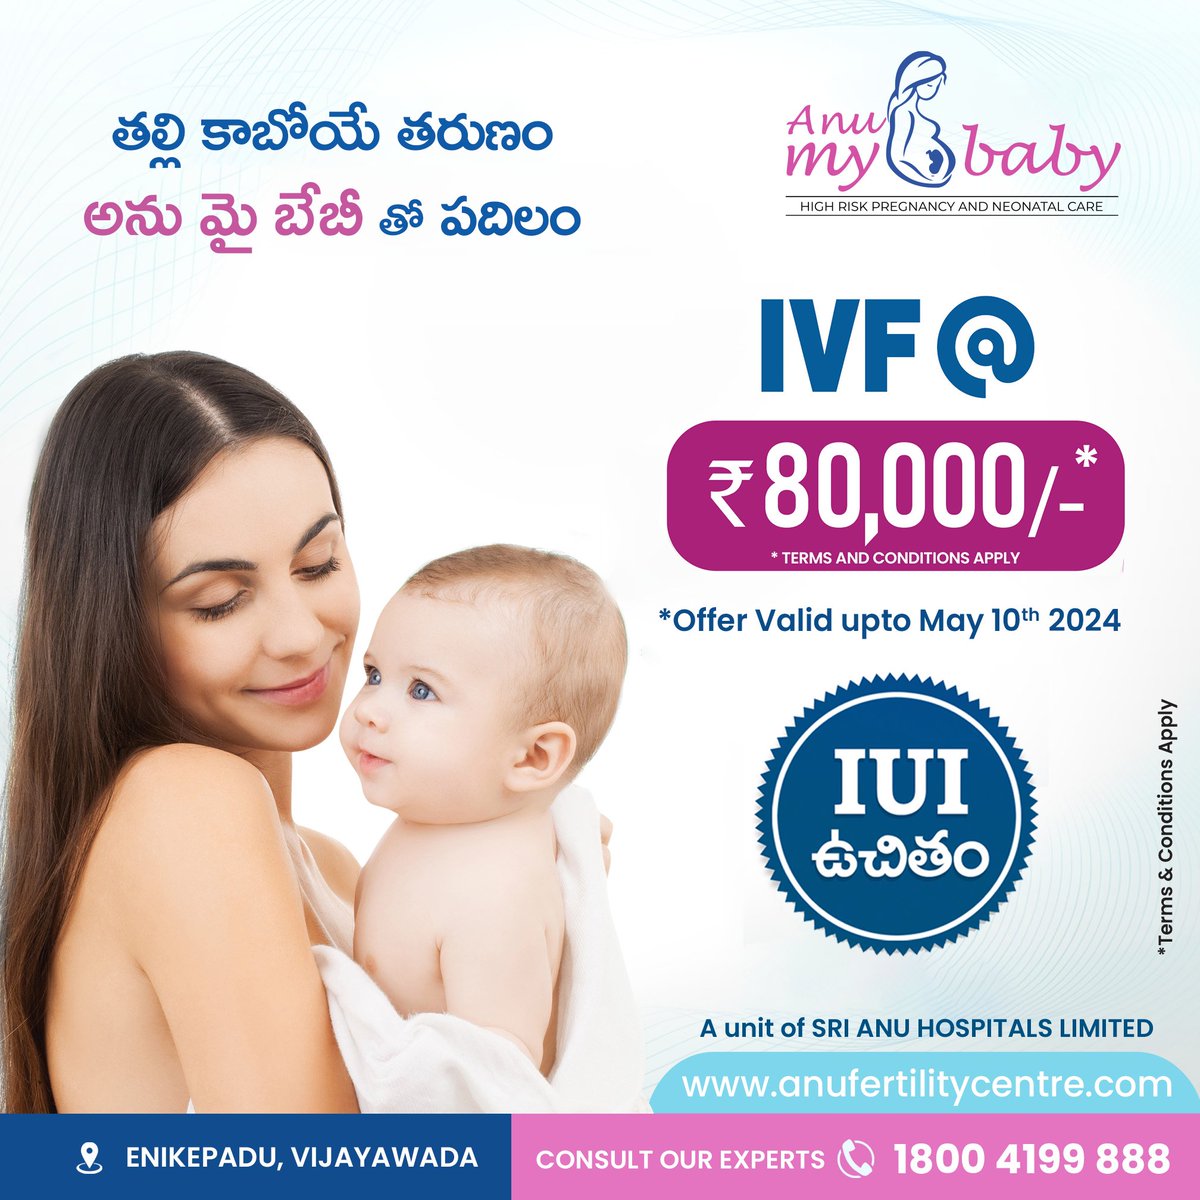 Discover the happiness of beginning a family with Anu Fertility Centre's special deal: Get Free IUI and IVF for only Rs.80,000/-*
#Anufertility #vijayawada #ivf #IVFSupport #IUITreatment #FertilityJourney #IVFSuccess #IUI #FertilityCommunity #infertility #IVFJourney #ivfpackage